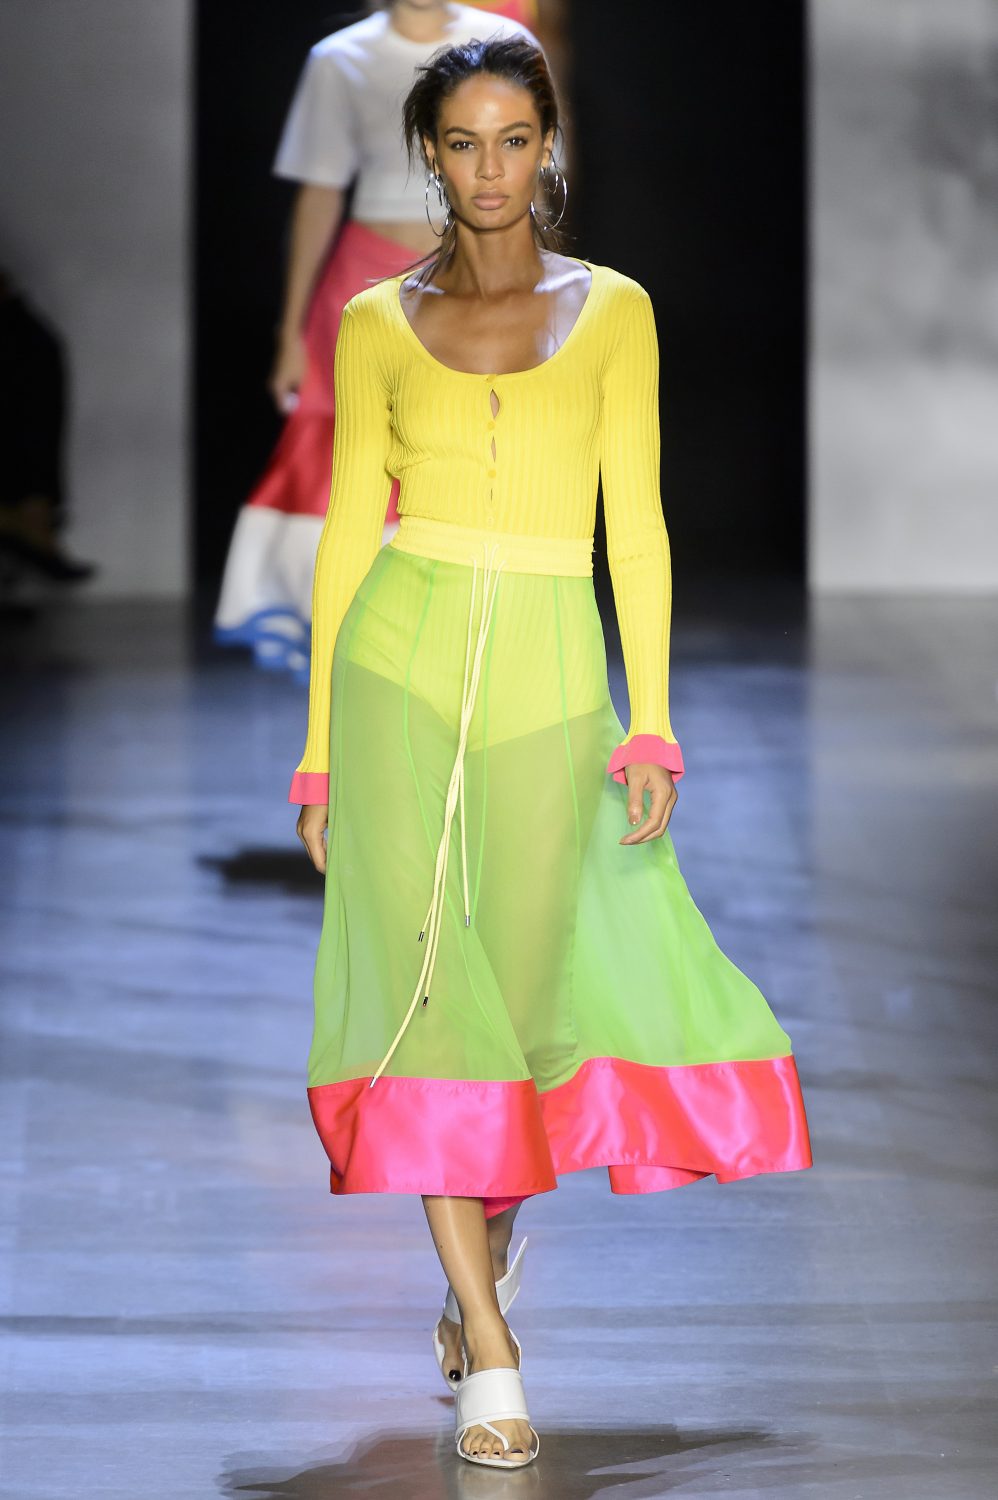 Neon Is The Controversial Trend Brightening Up The Runway | Fashion | MOJEH